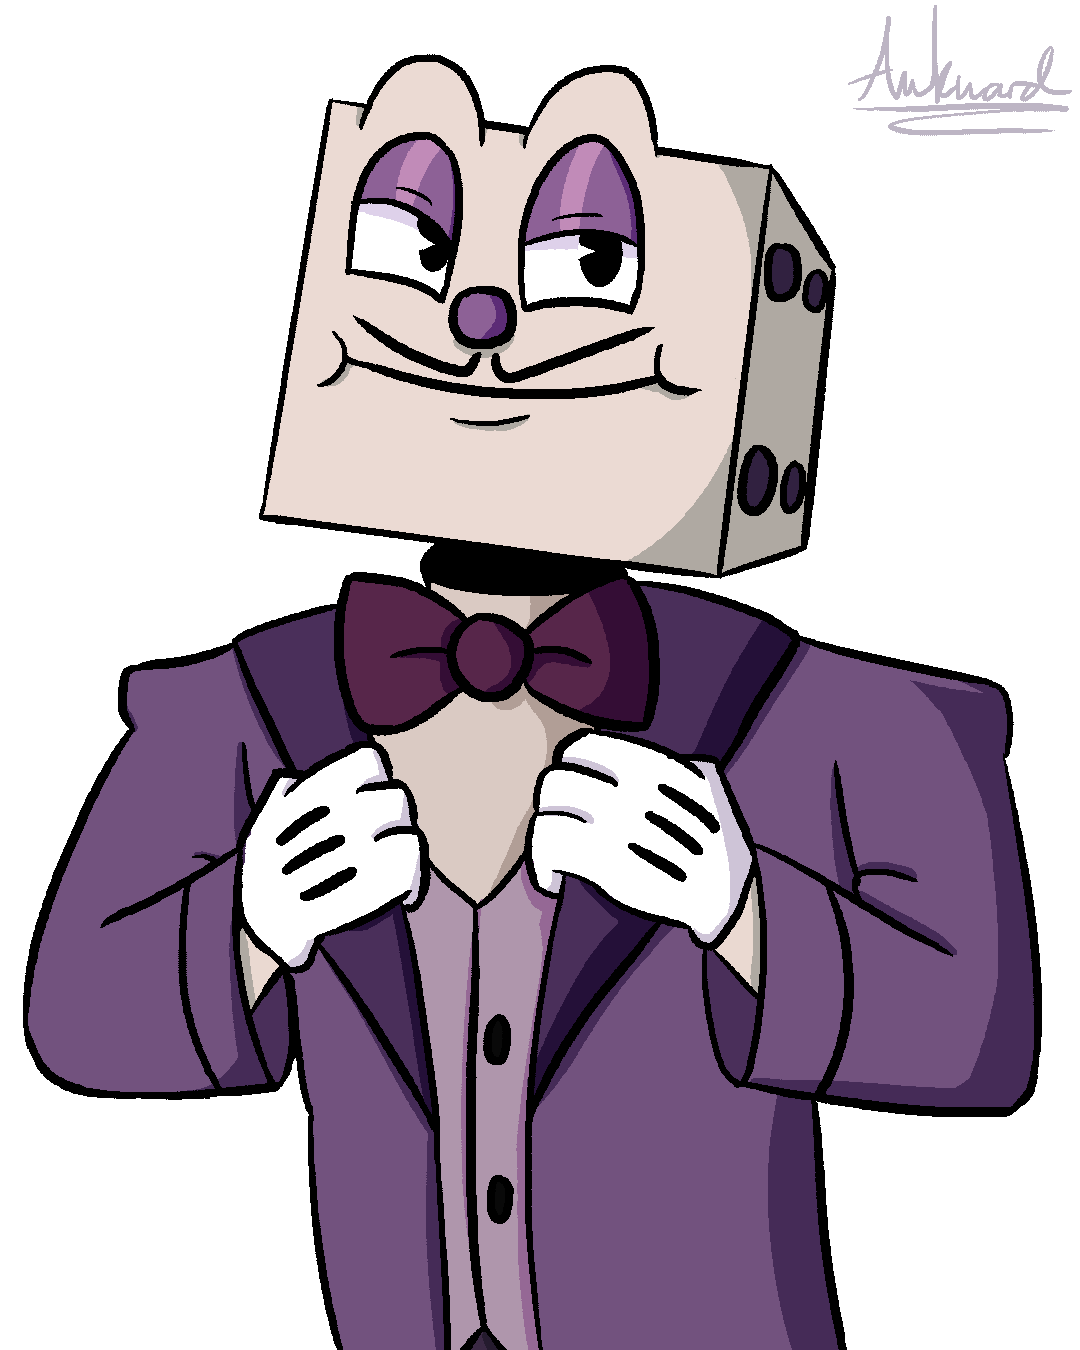 King Dice (Cuphead) by Shrimpeggss on DeviantArt